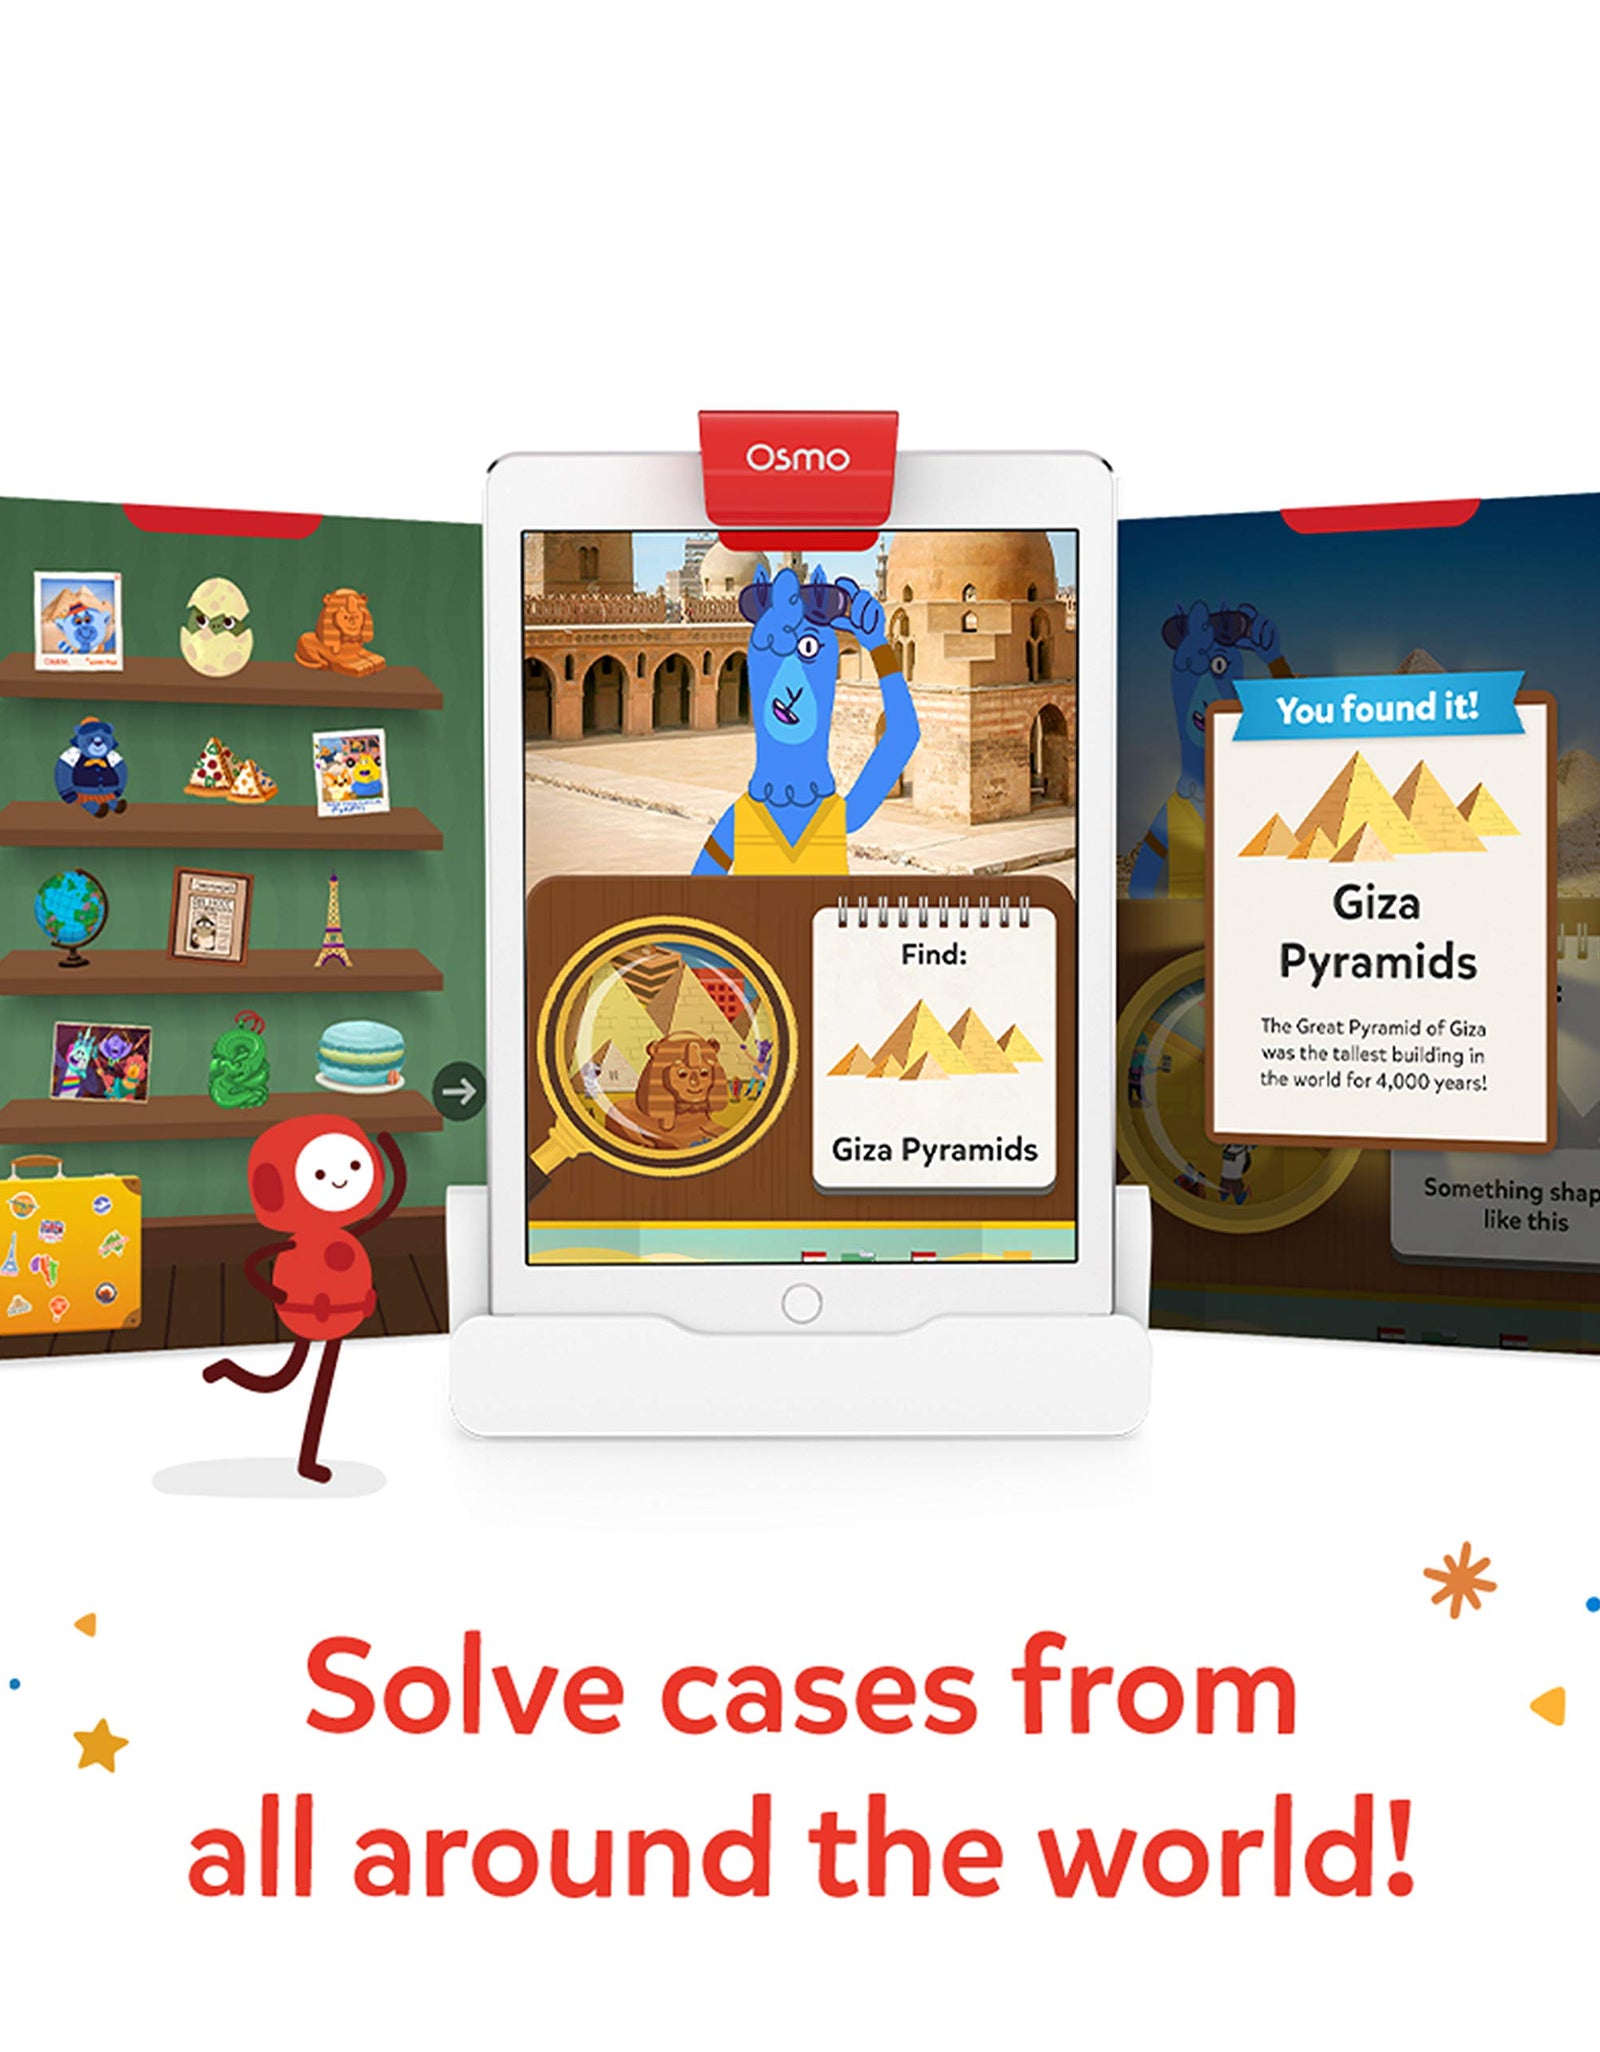 Osmo - Detective Agency - Ages 5-12 - Solve Global Mysteries - STEM Toy - For iPad or Fire Tablet (Osmo Base Required)